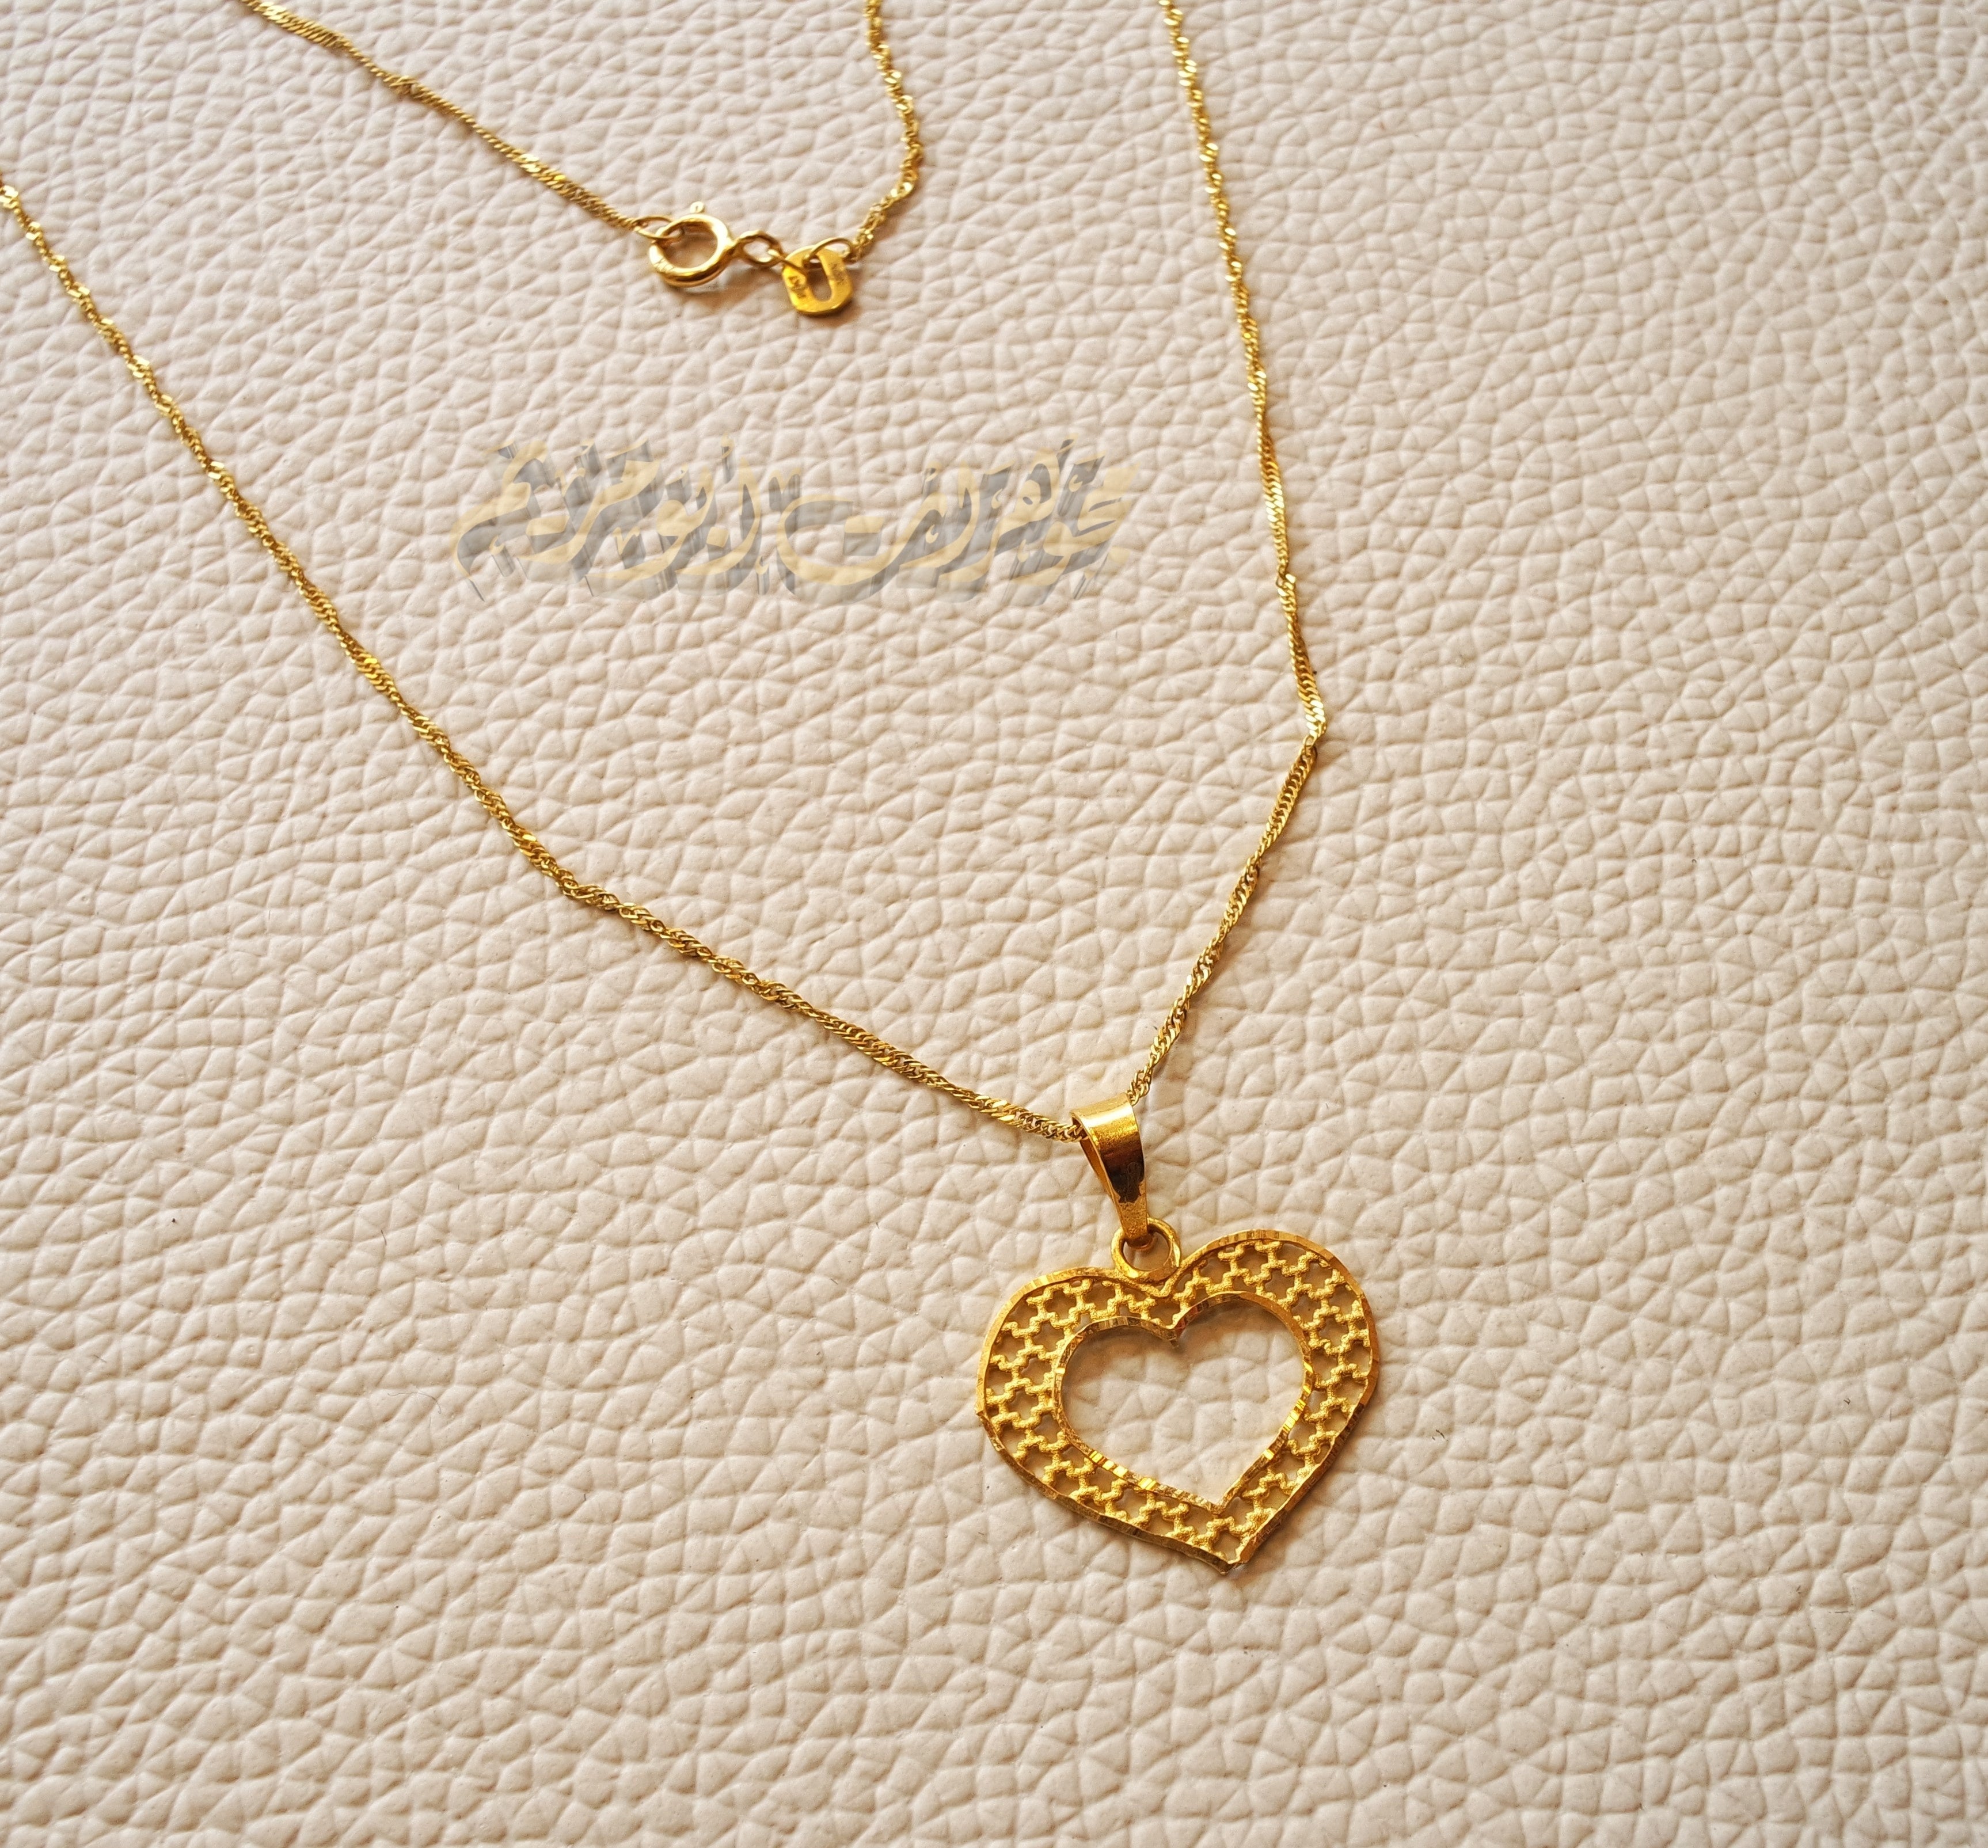 21K gold heart 2 pendant with Disco chain gold jewelry 16 and 20 inches fast shipping with gift box